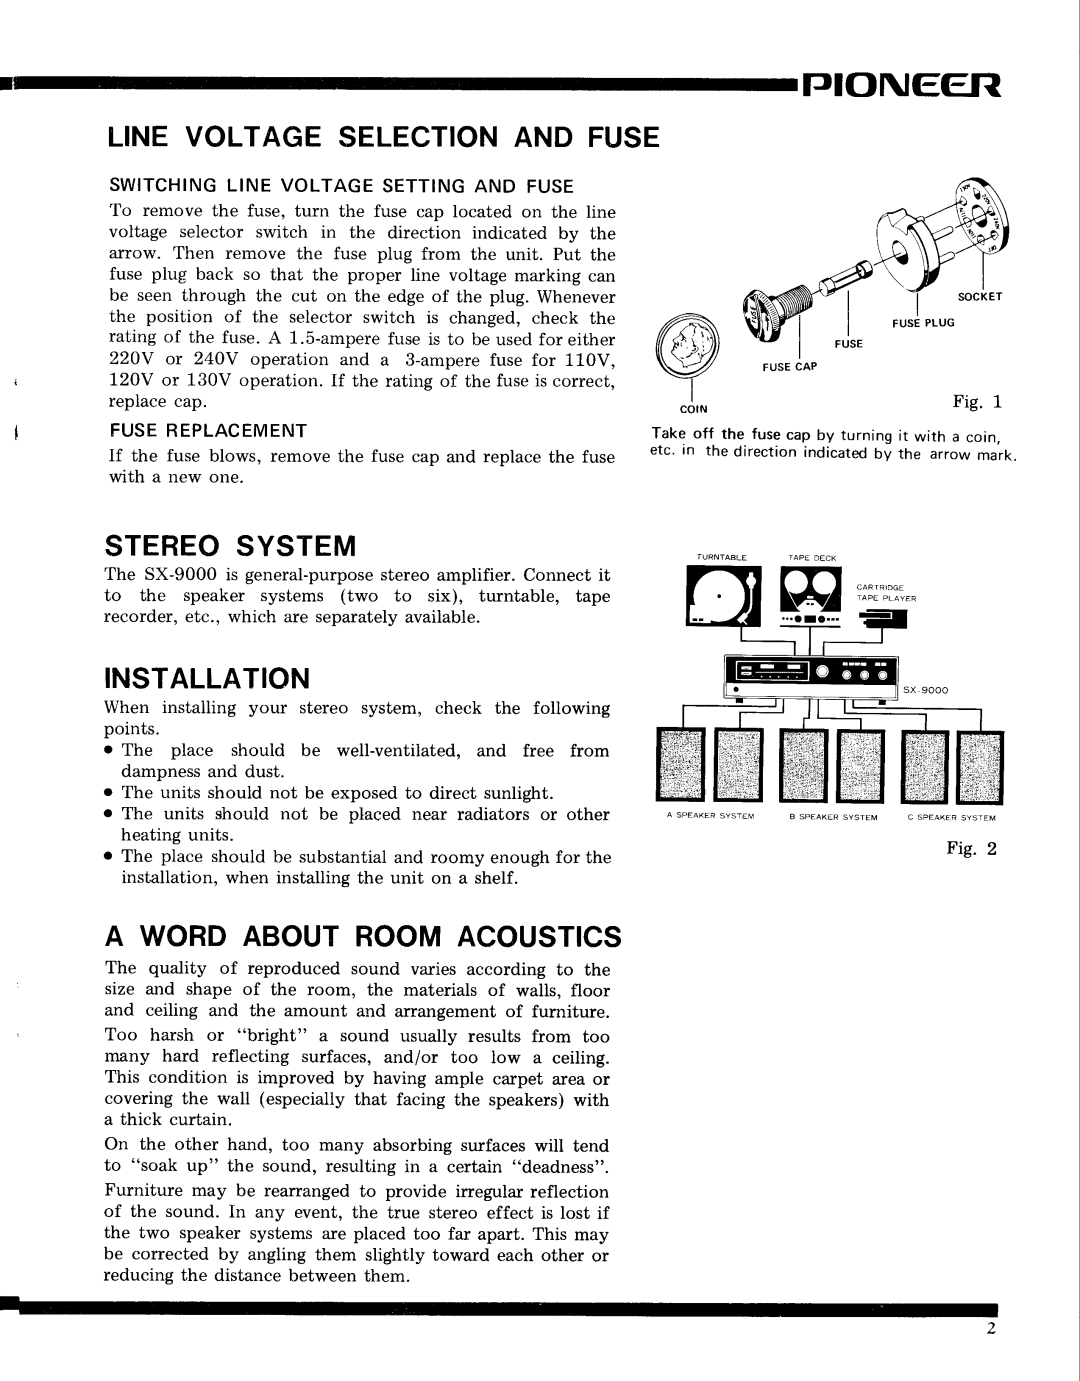 Pioneer SX-9000 service manual Tjtoneer, Linevoltageselectionand Fuse, Stereosystem, Installation, A Wordaboutroomacoustics 